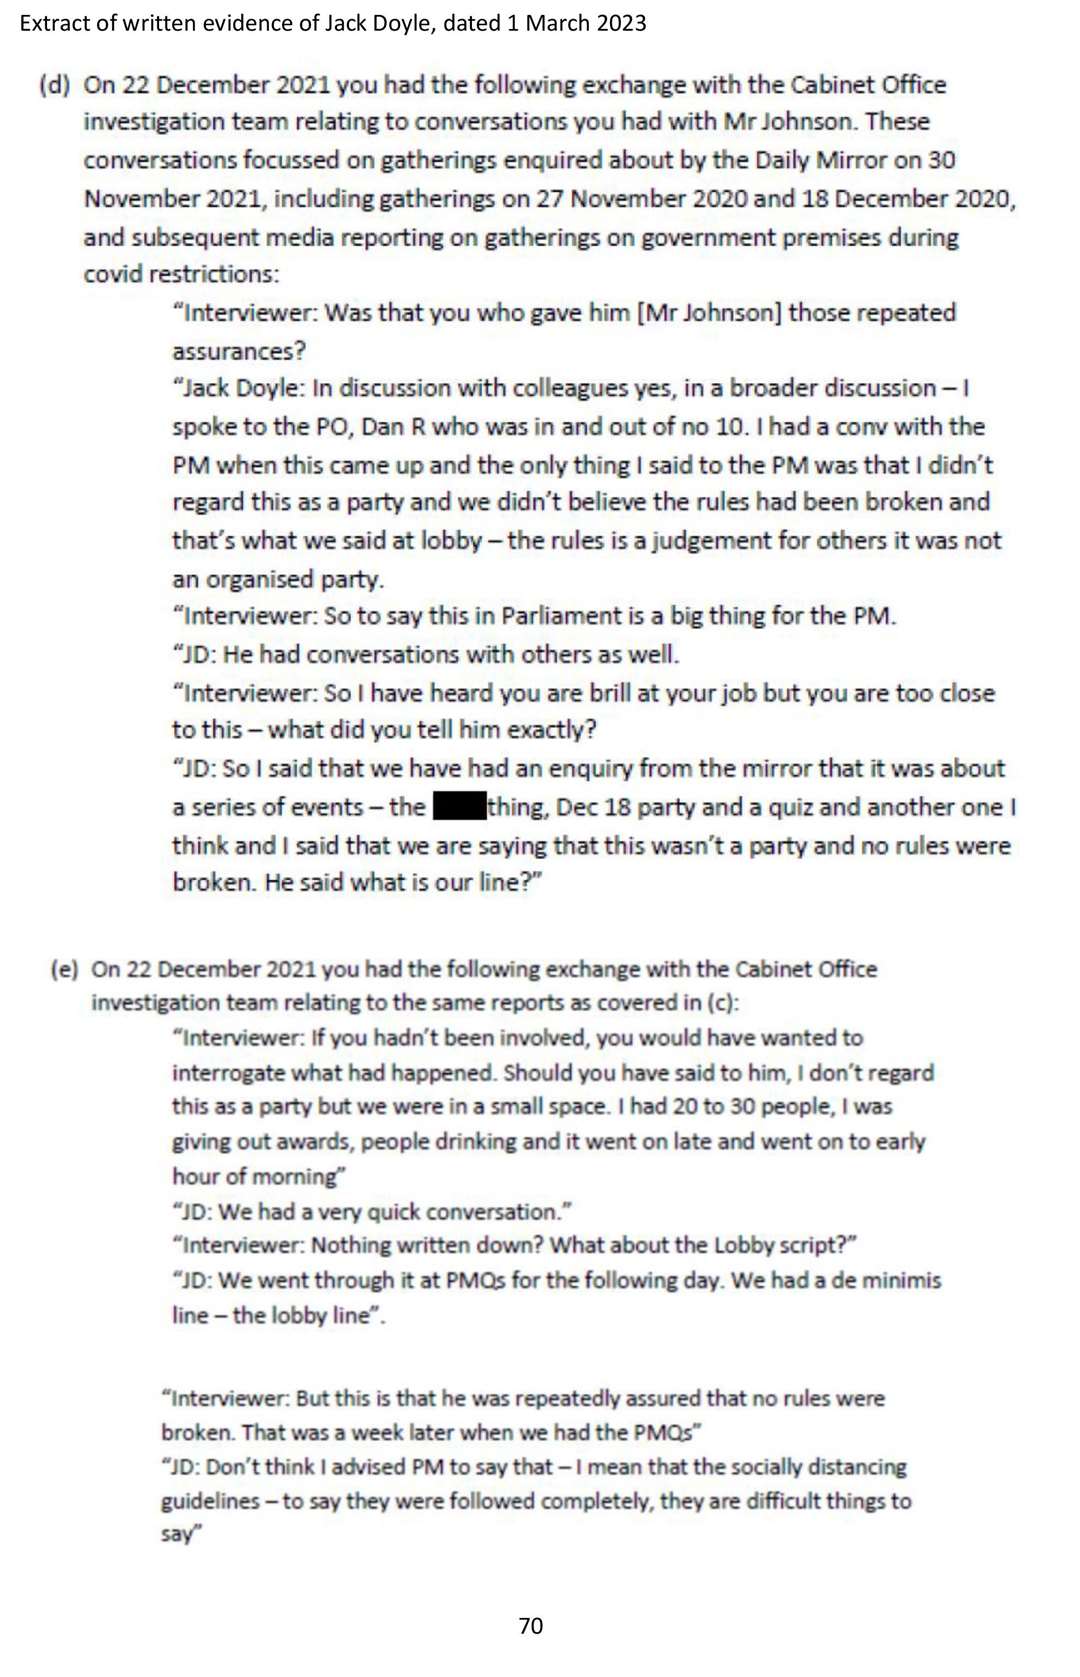 Written evidence of Jack Doyle, which was released as part of the Commons Privileges Committee inquiry into claims that prime minister Boris Johnson knowingly misled Parliament over parties at No 10 (House of Commons/PA)